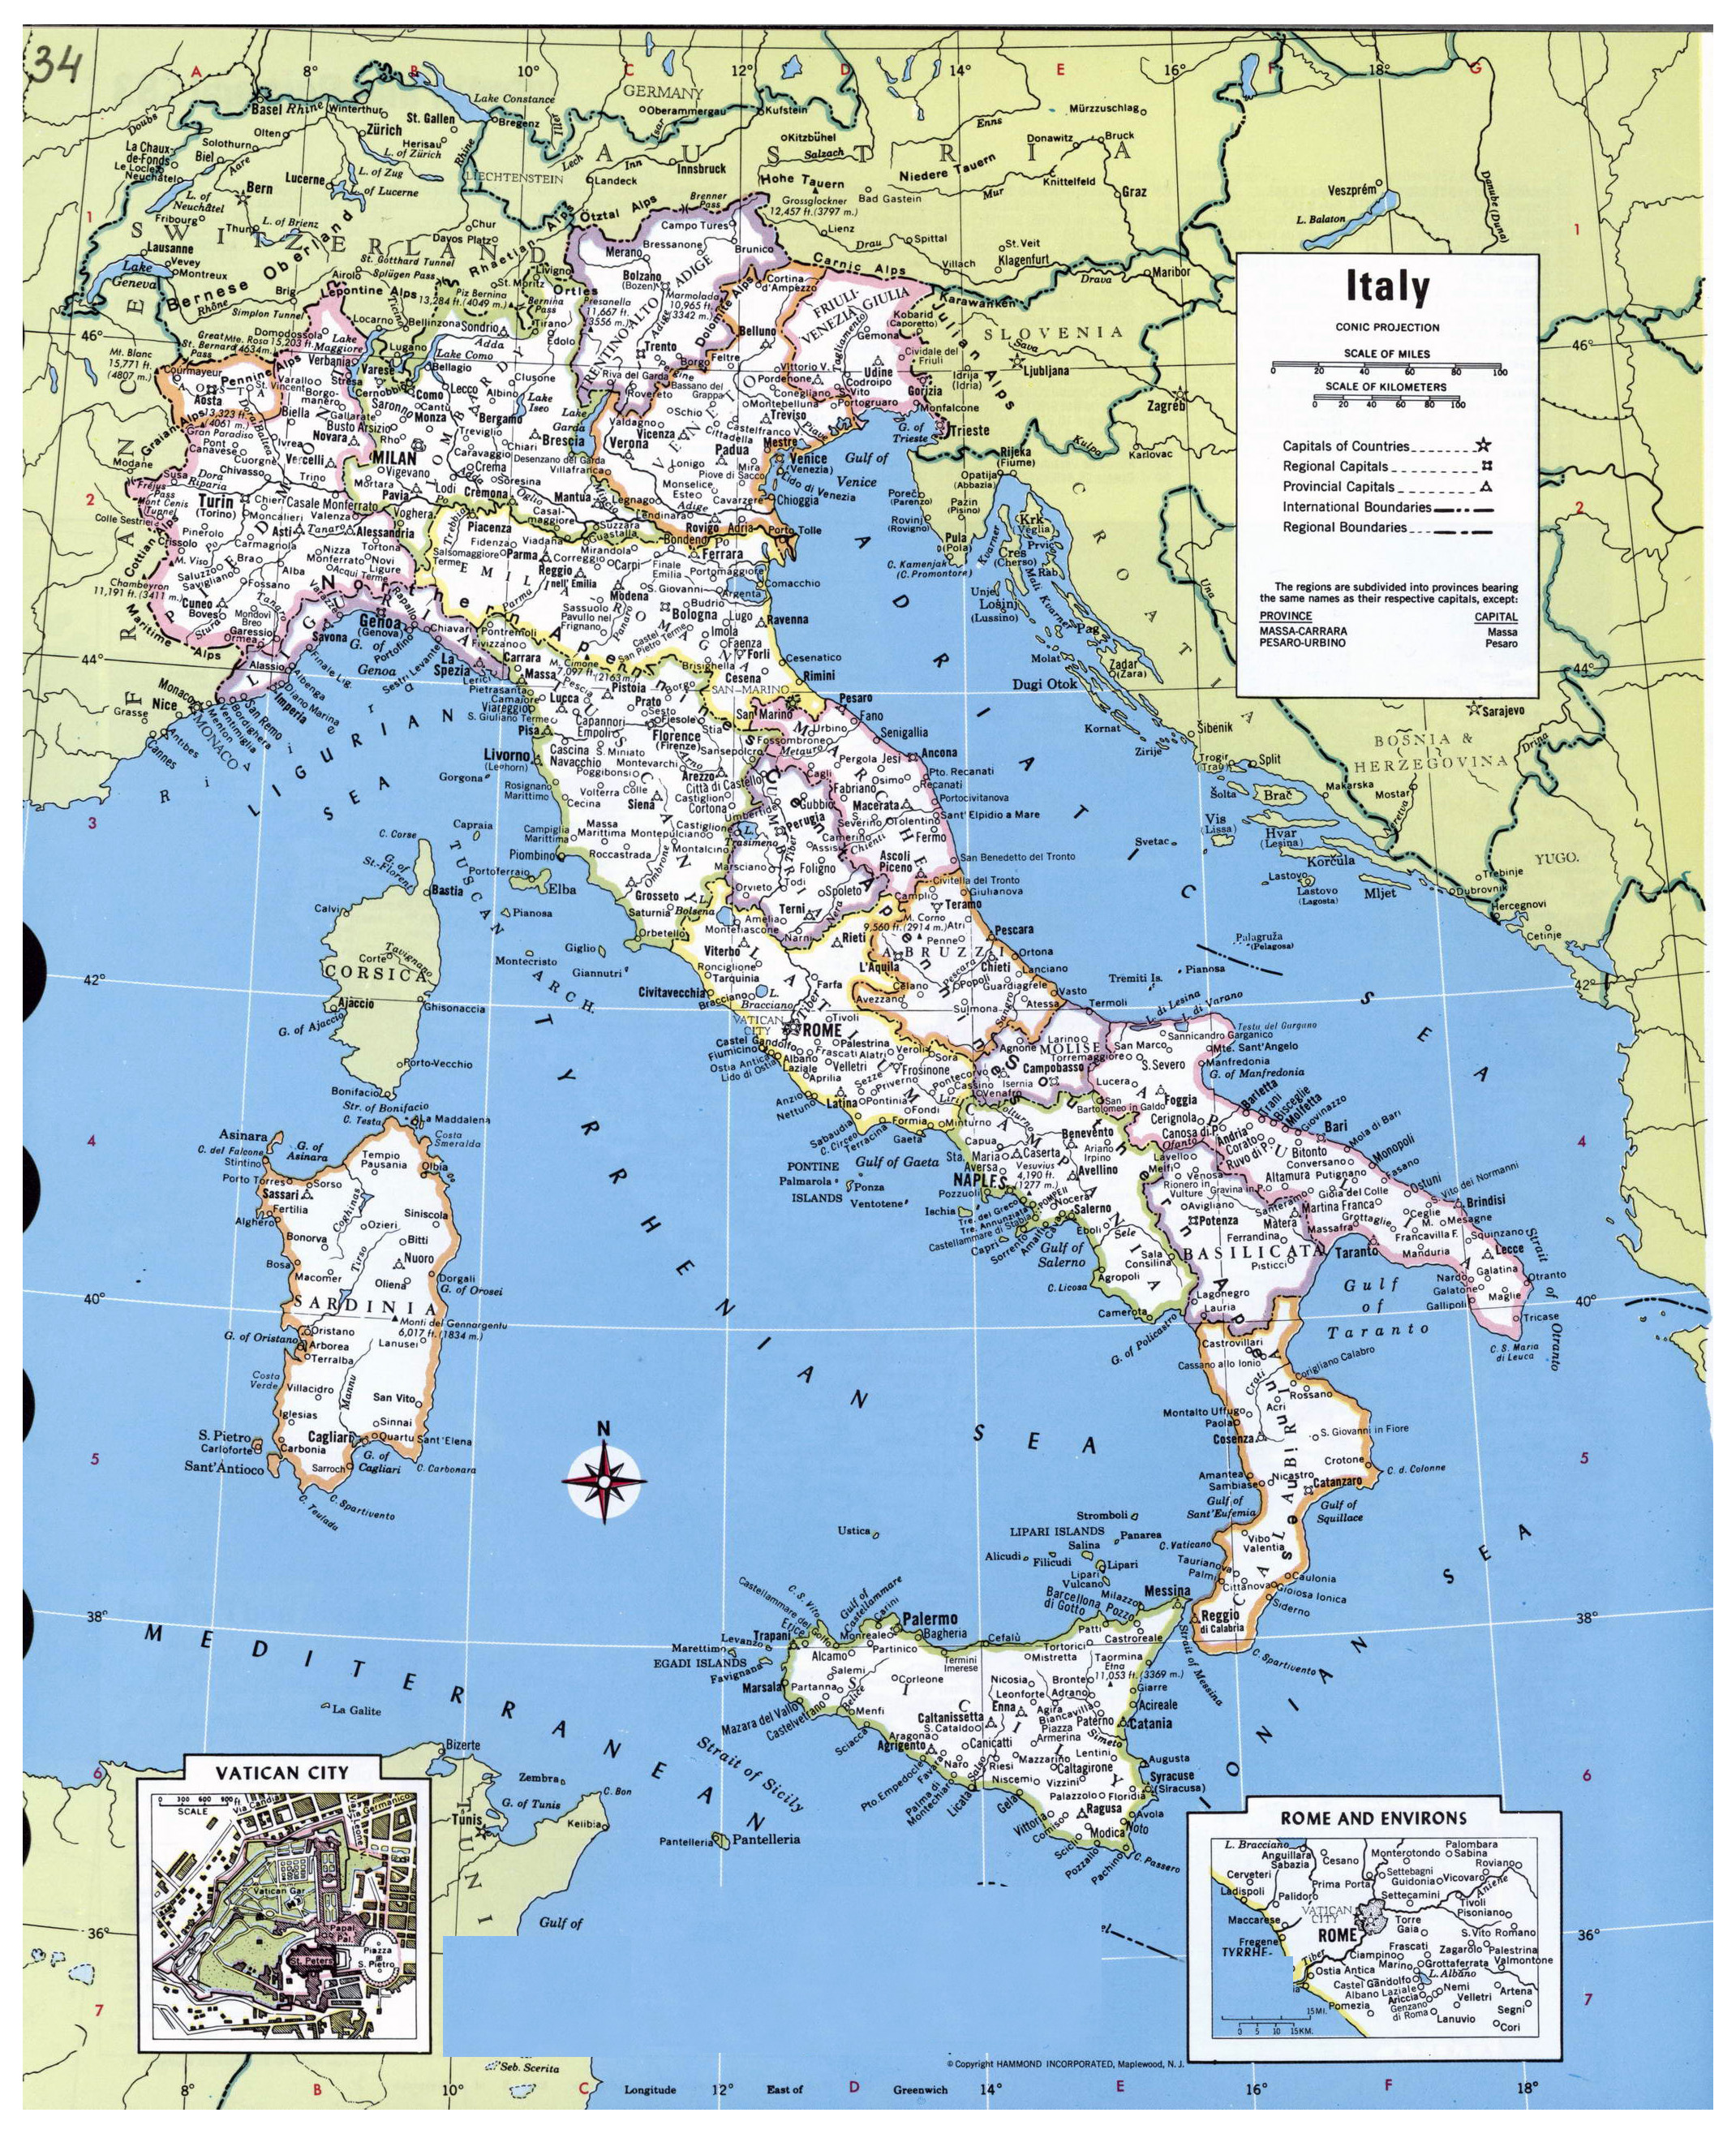 large-detailed-political-and-administrative-map-of-italy-with-major